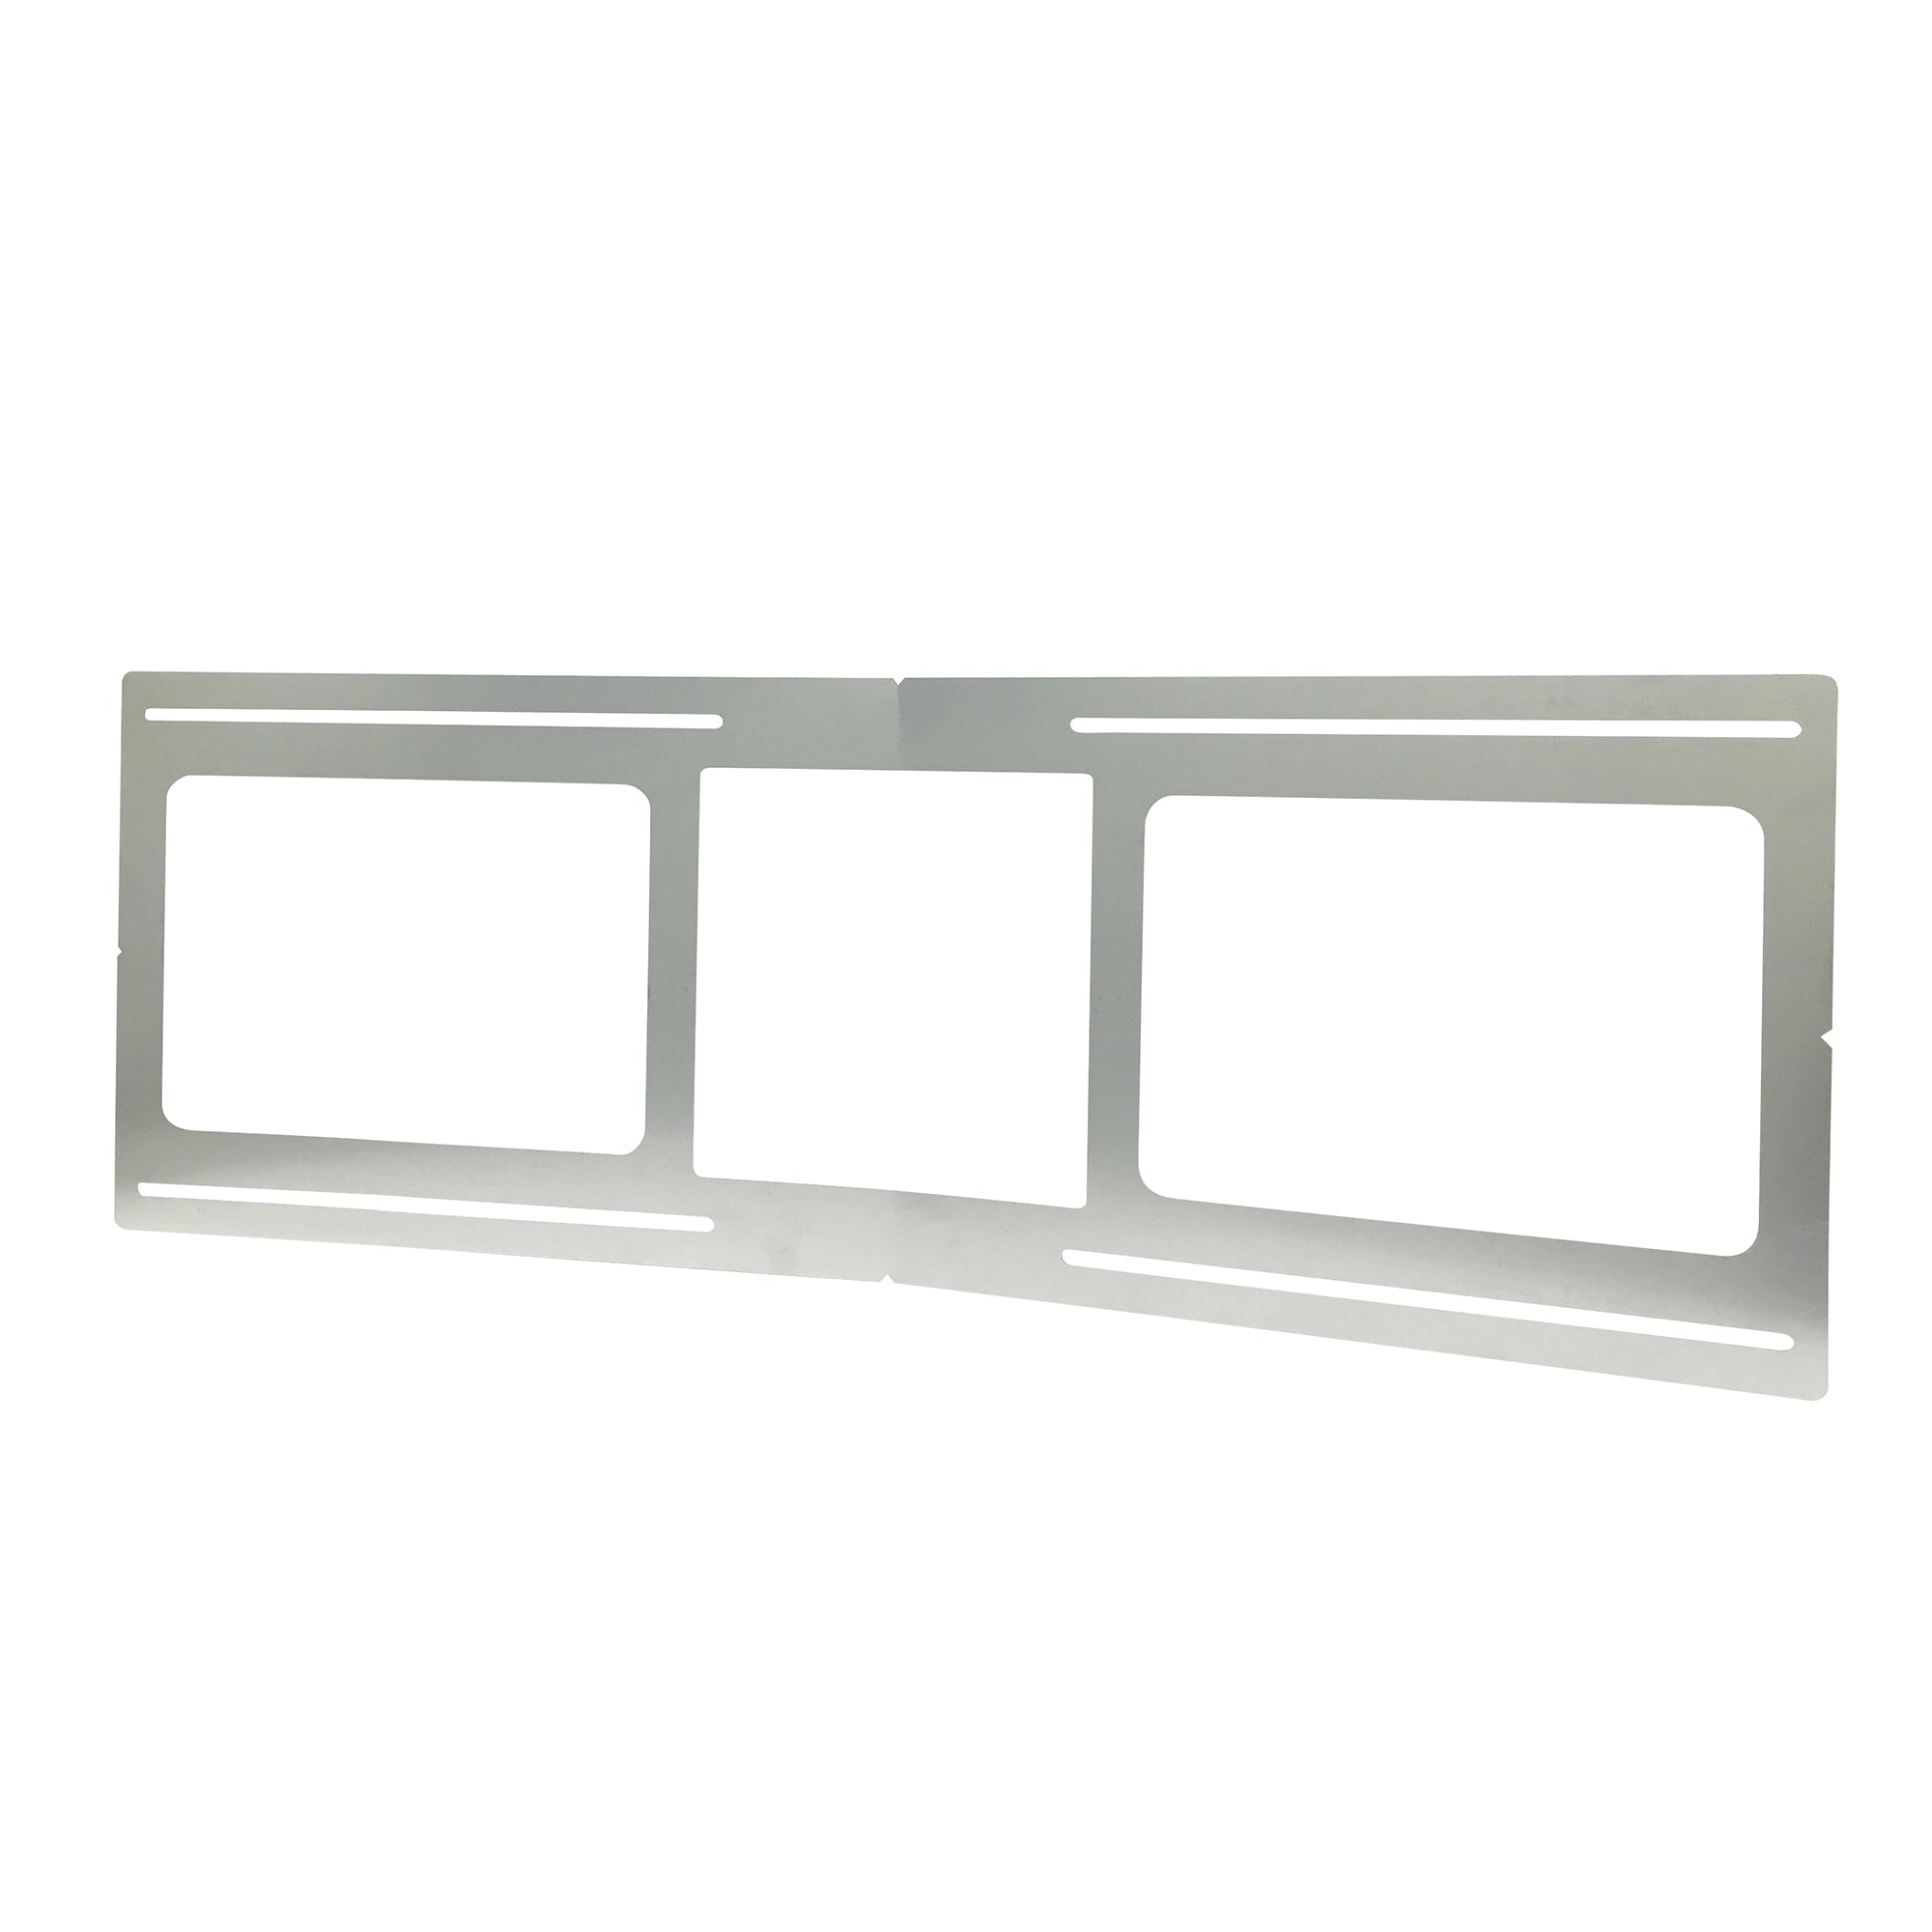 Nora Lighting NFP-S625 - Recessed - New Construction Plate for 6 Inch Square Can-less Downlights